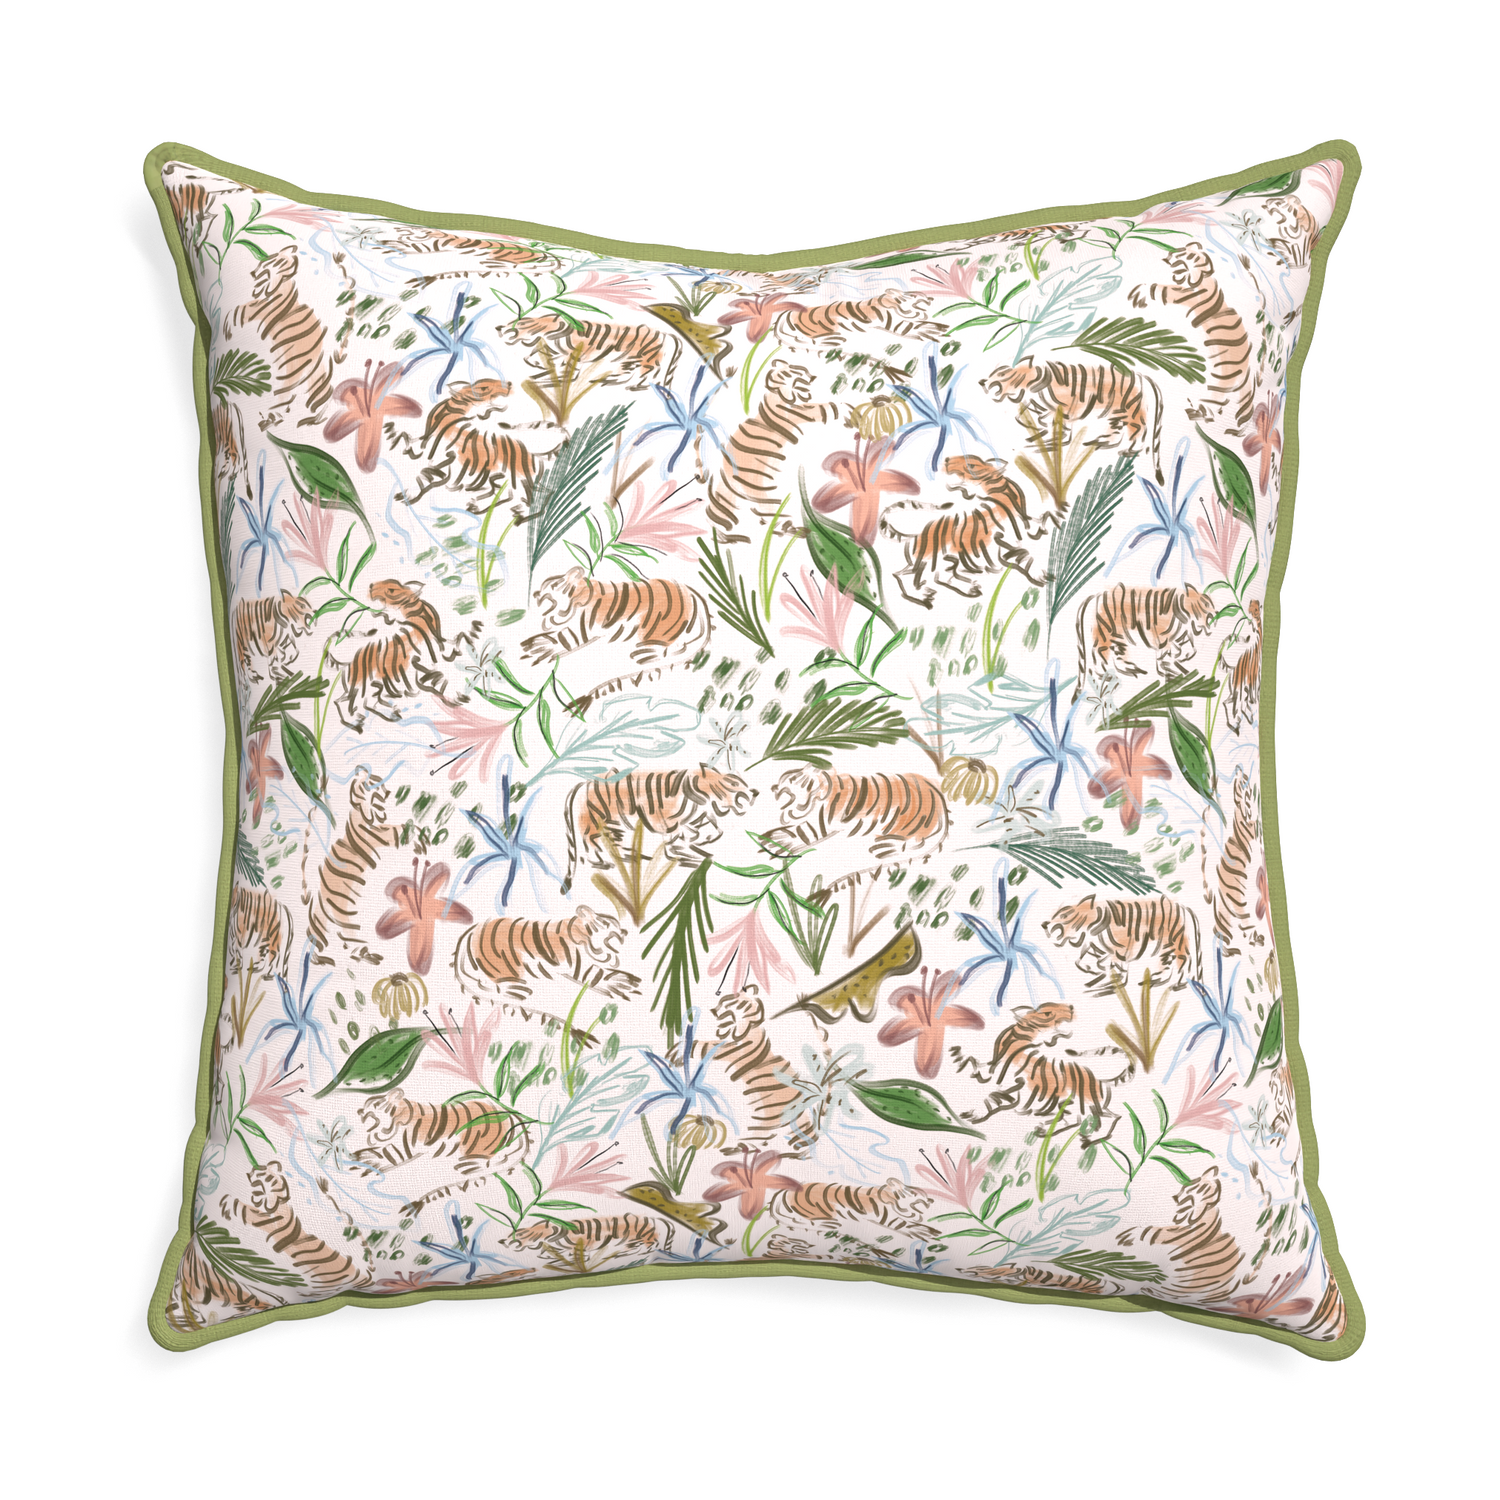 Euro-sham frida pink custom pink chinoiserie tigerpillow with moss piping on white background